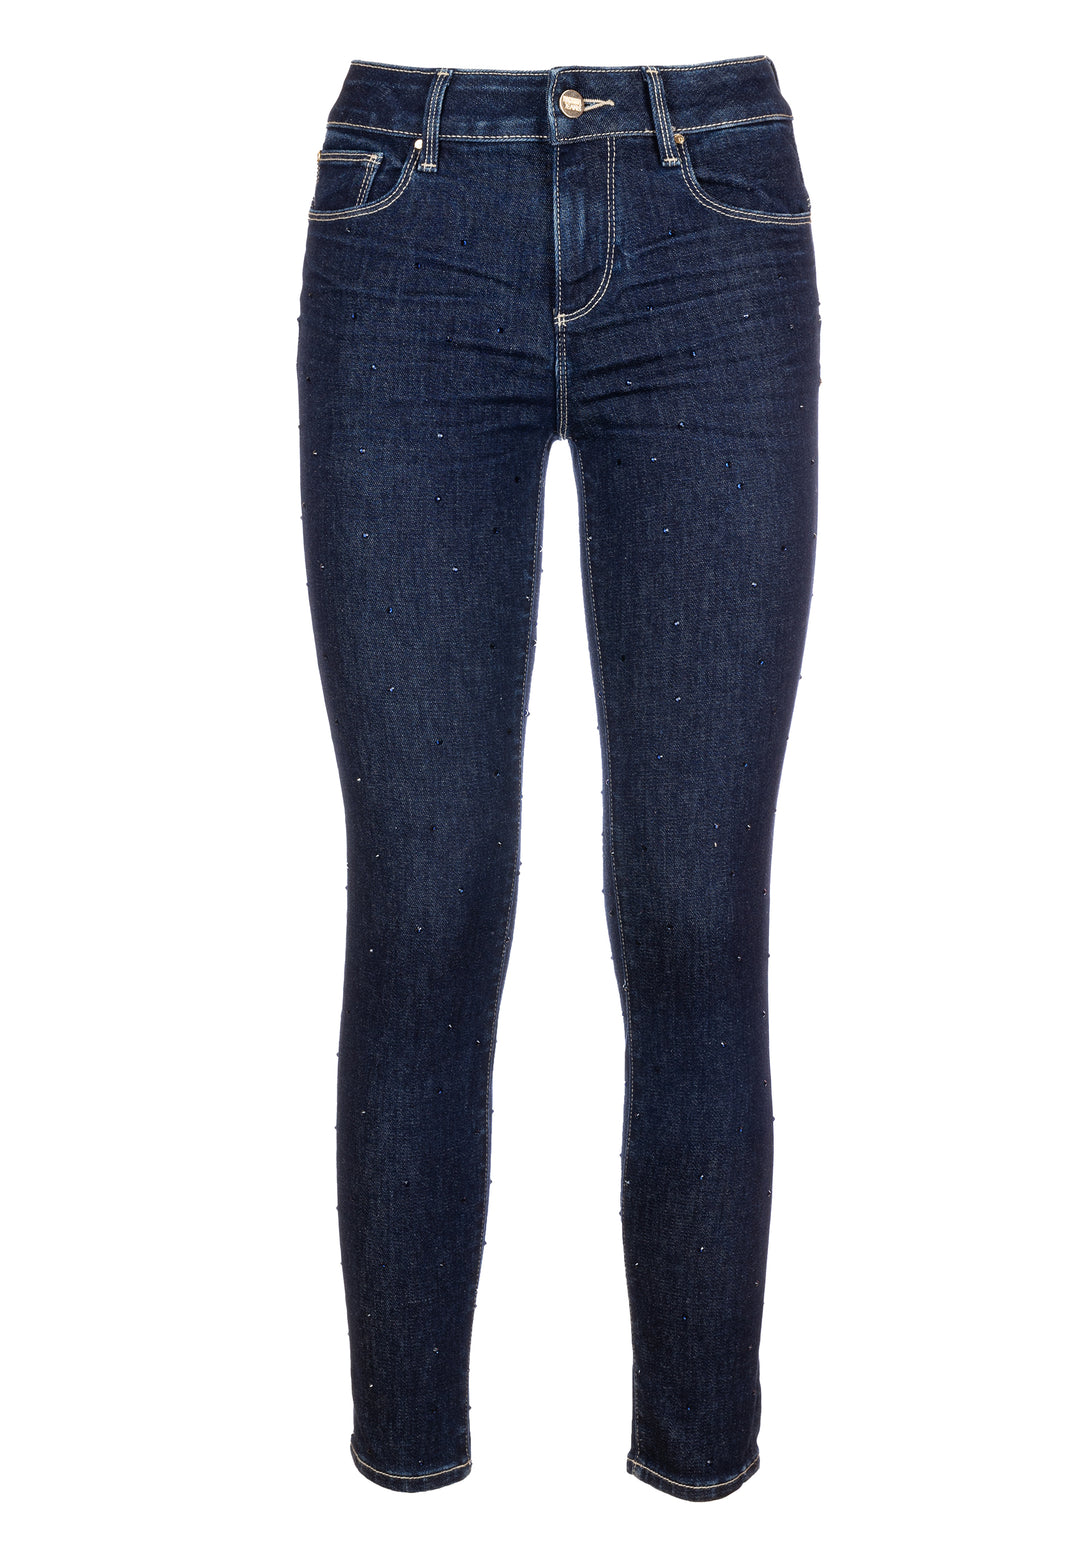 Jeans skinny fit with push up effect made in denim with raw wash Fracomina FP23WV8000D40193-L23-1